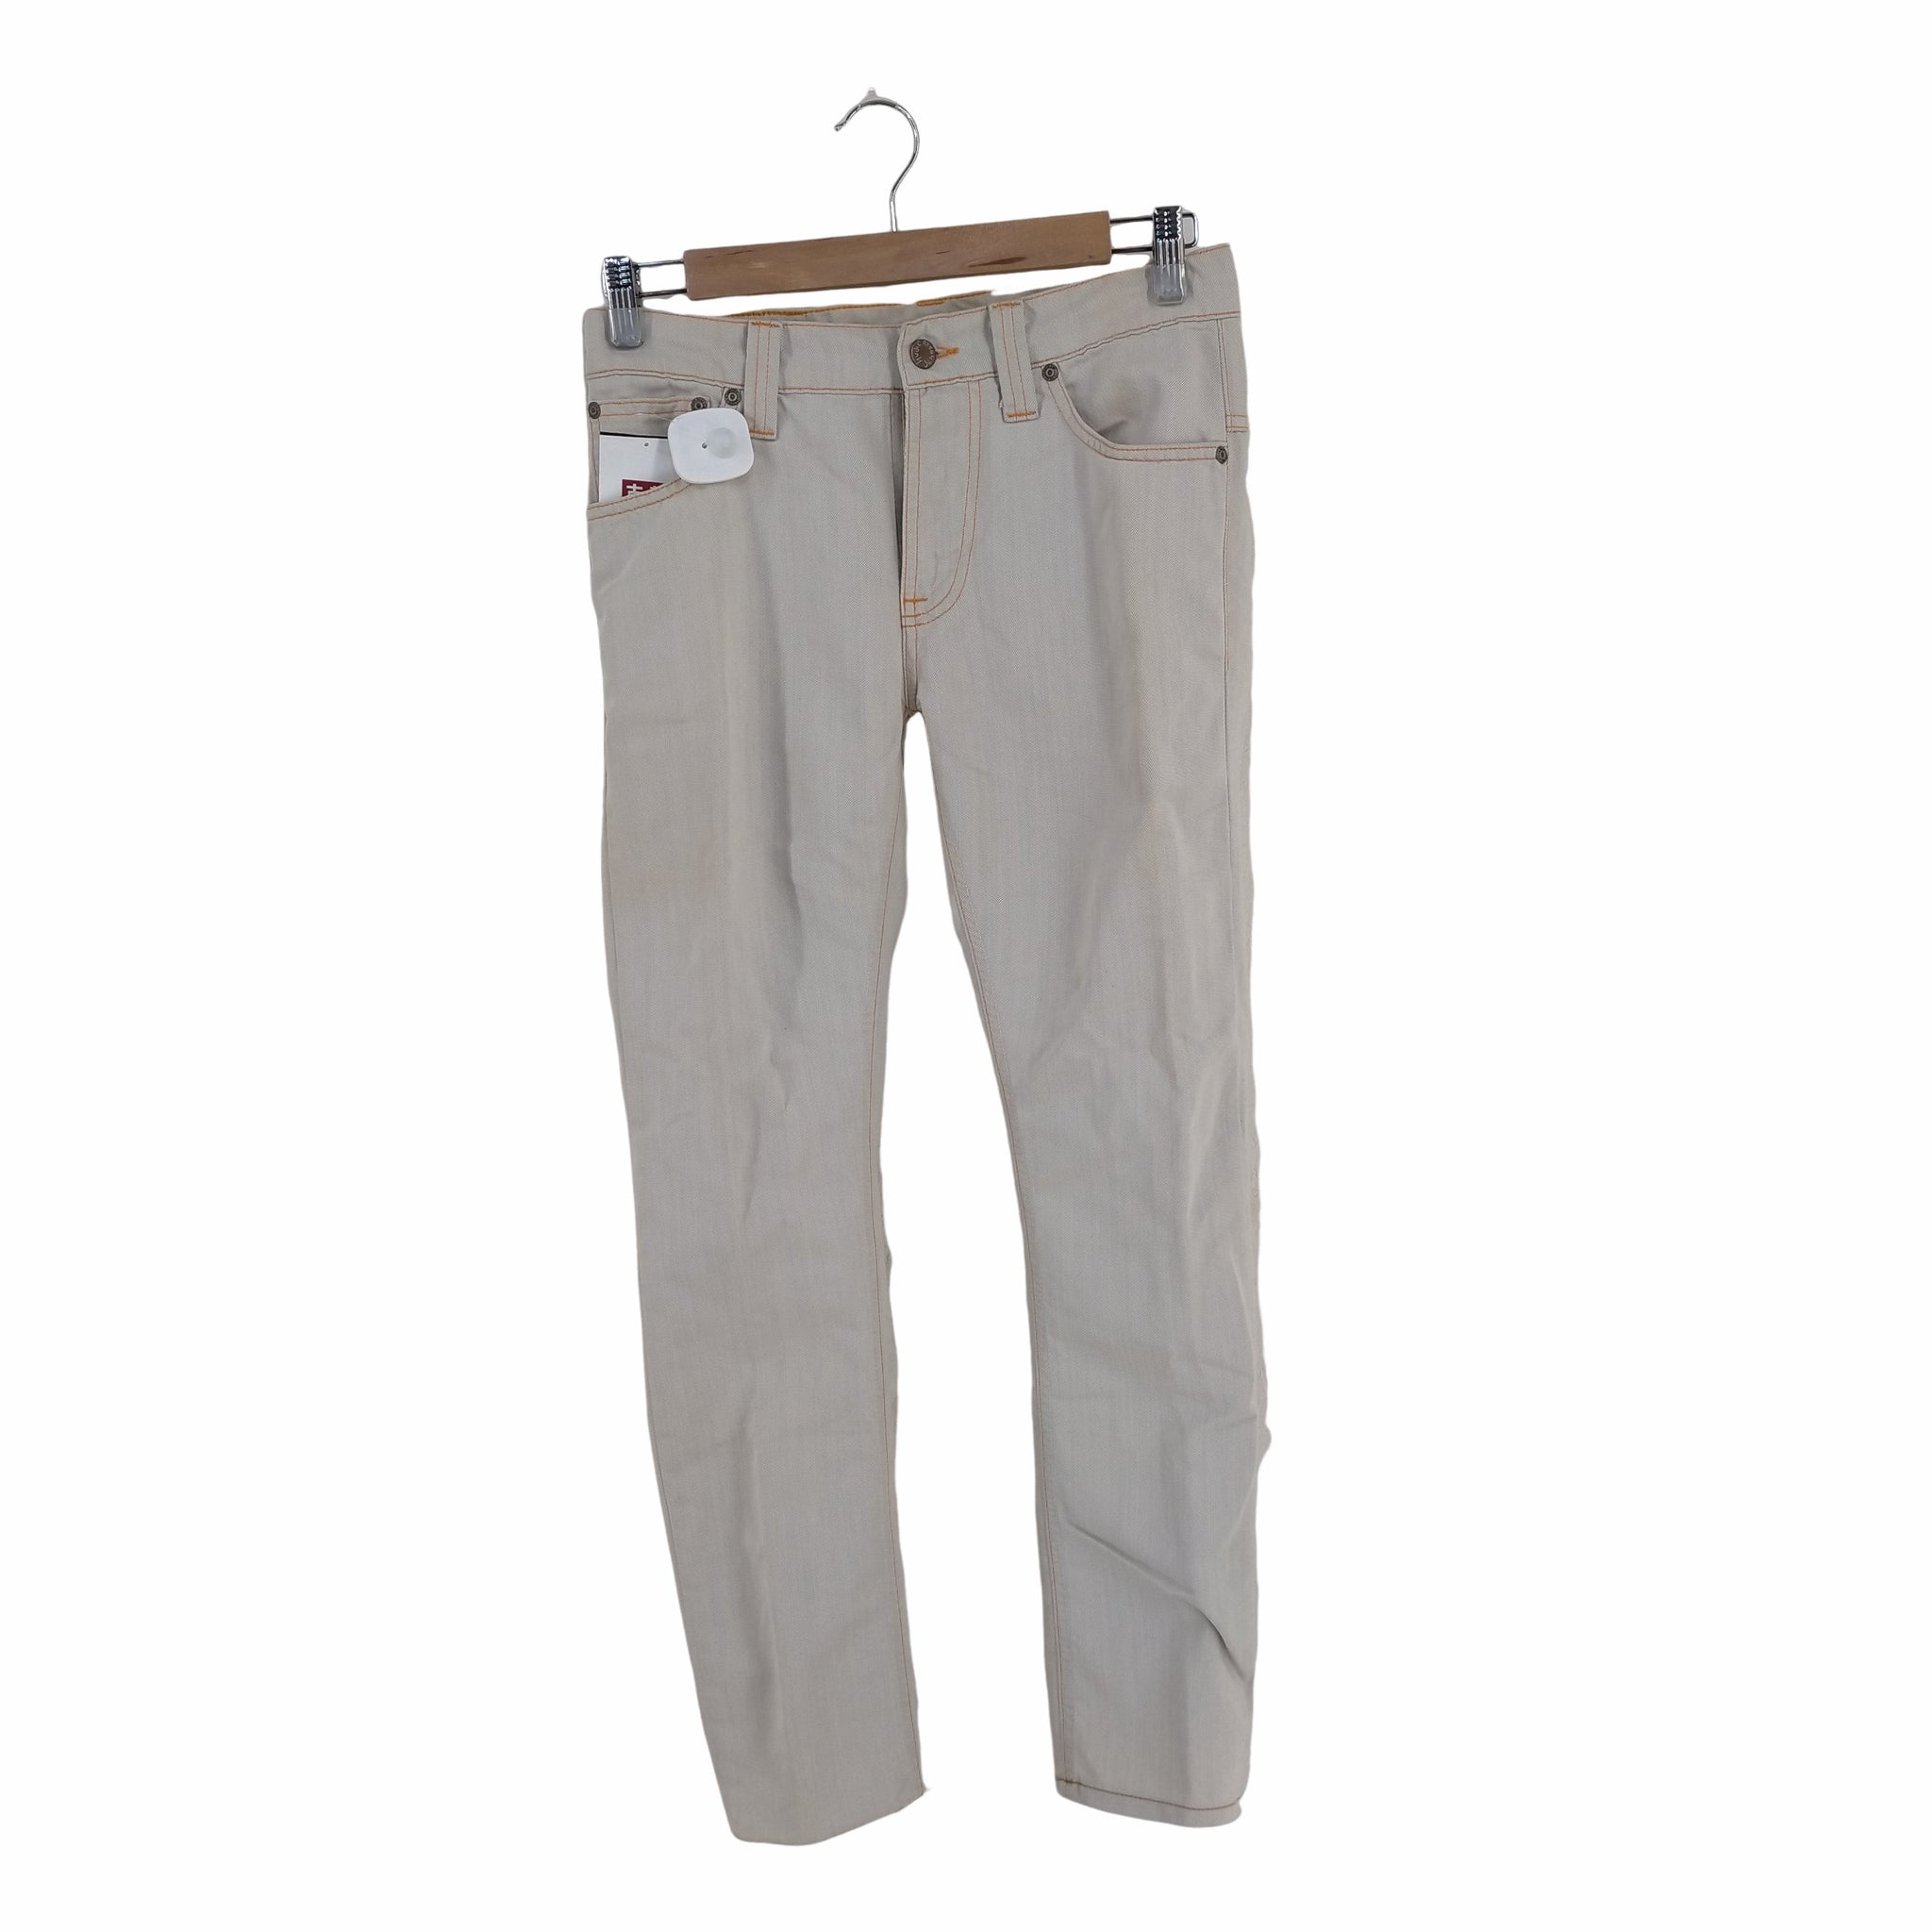 Nudie Jeans(ヌーディージーンズ)THIN FINN SILVER WEFT ECRC